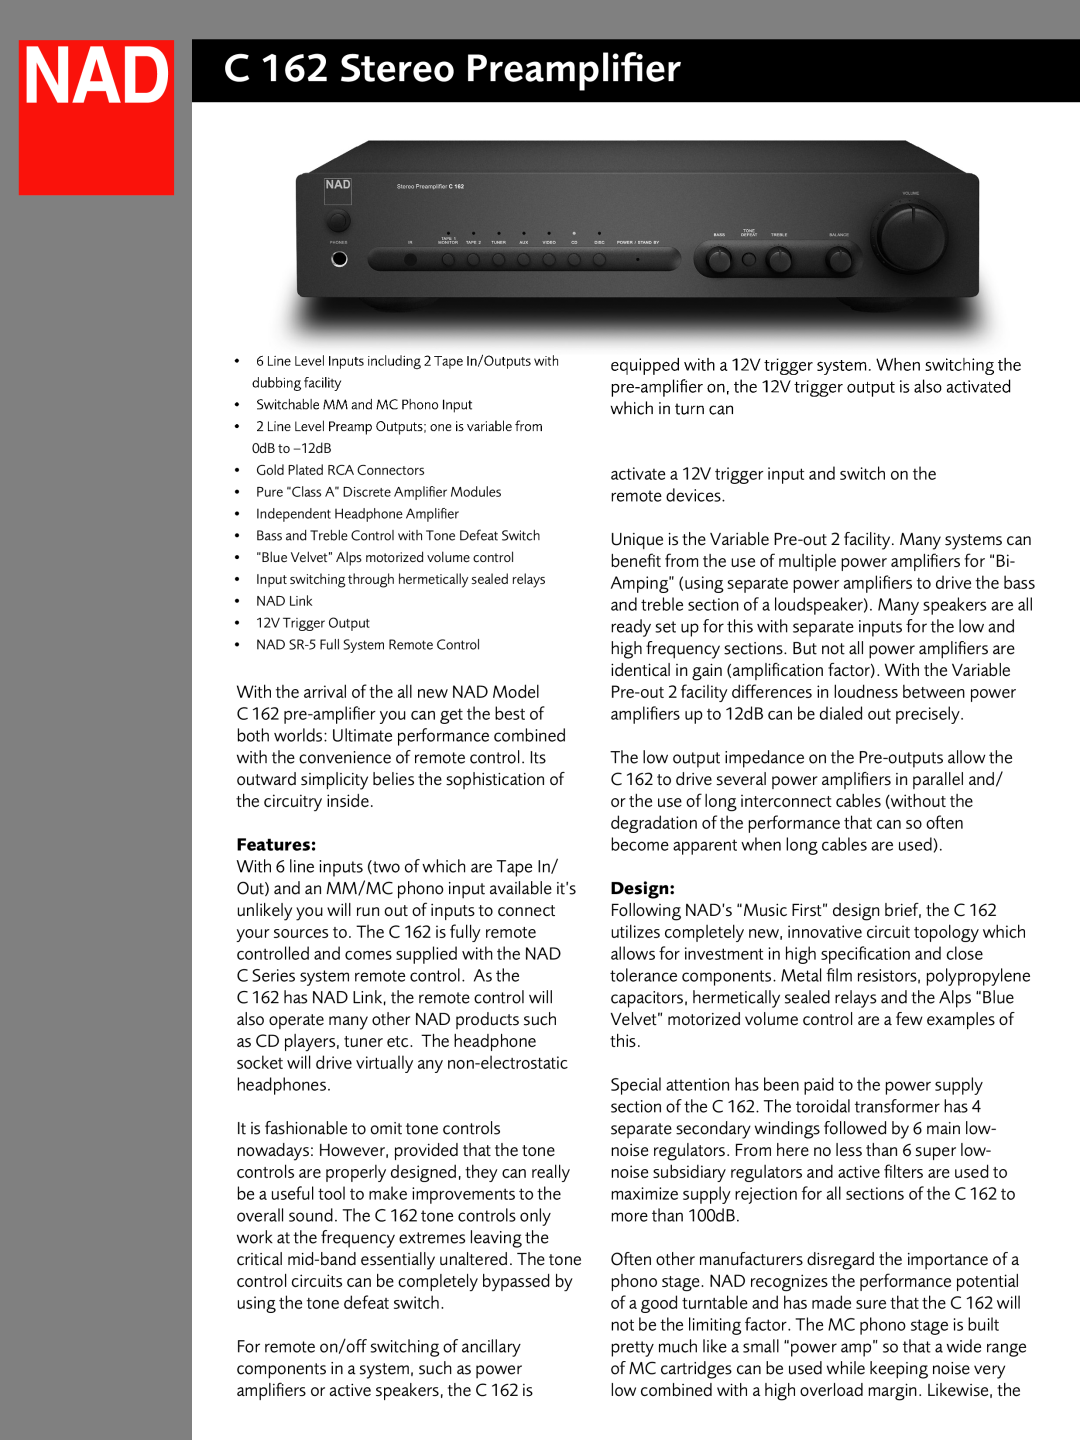 NAD C162 manual C 162 Stereo Preamplifier, Features, Design 